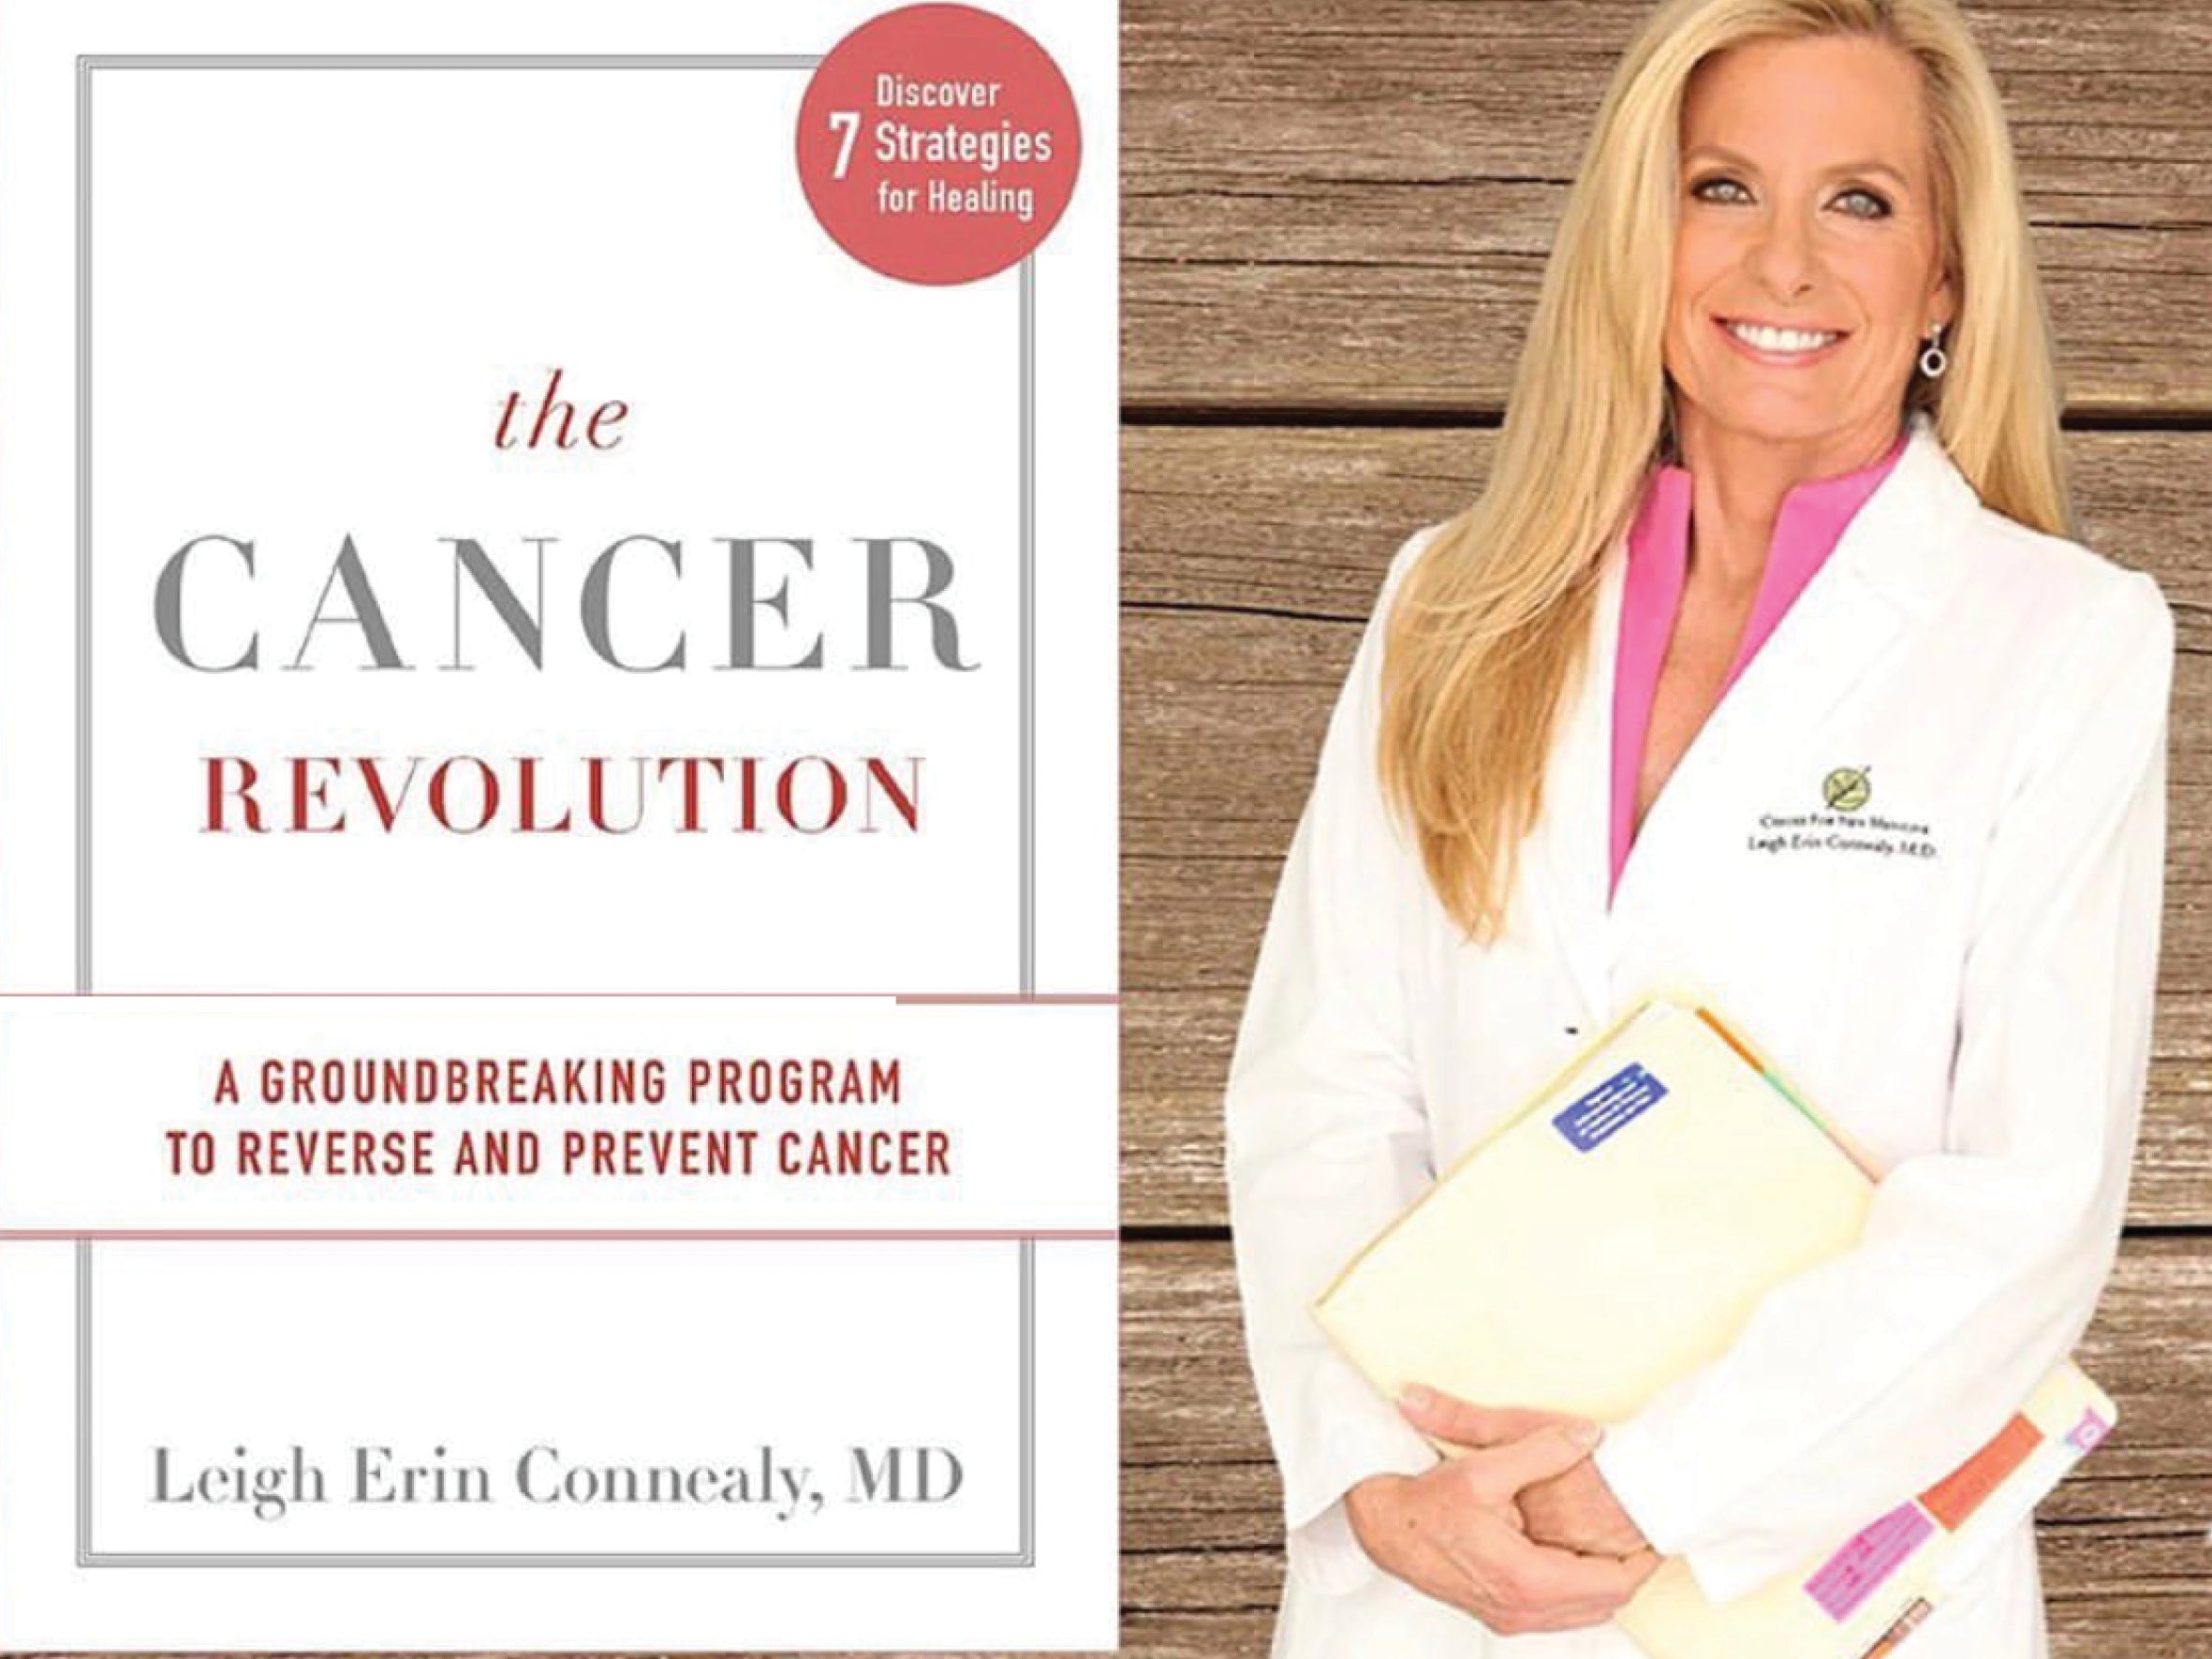 Joint health all year round & the incredible Dr Erin Connealy